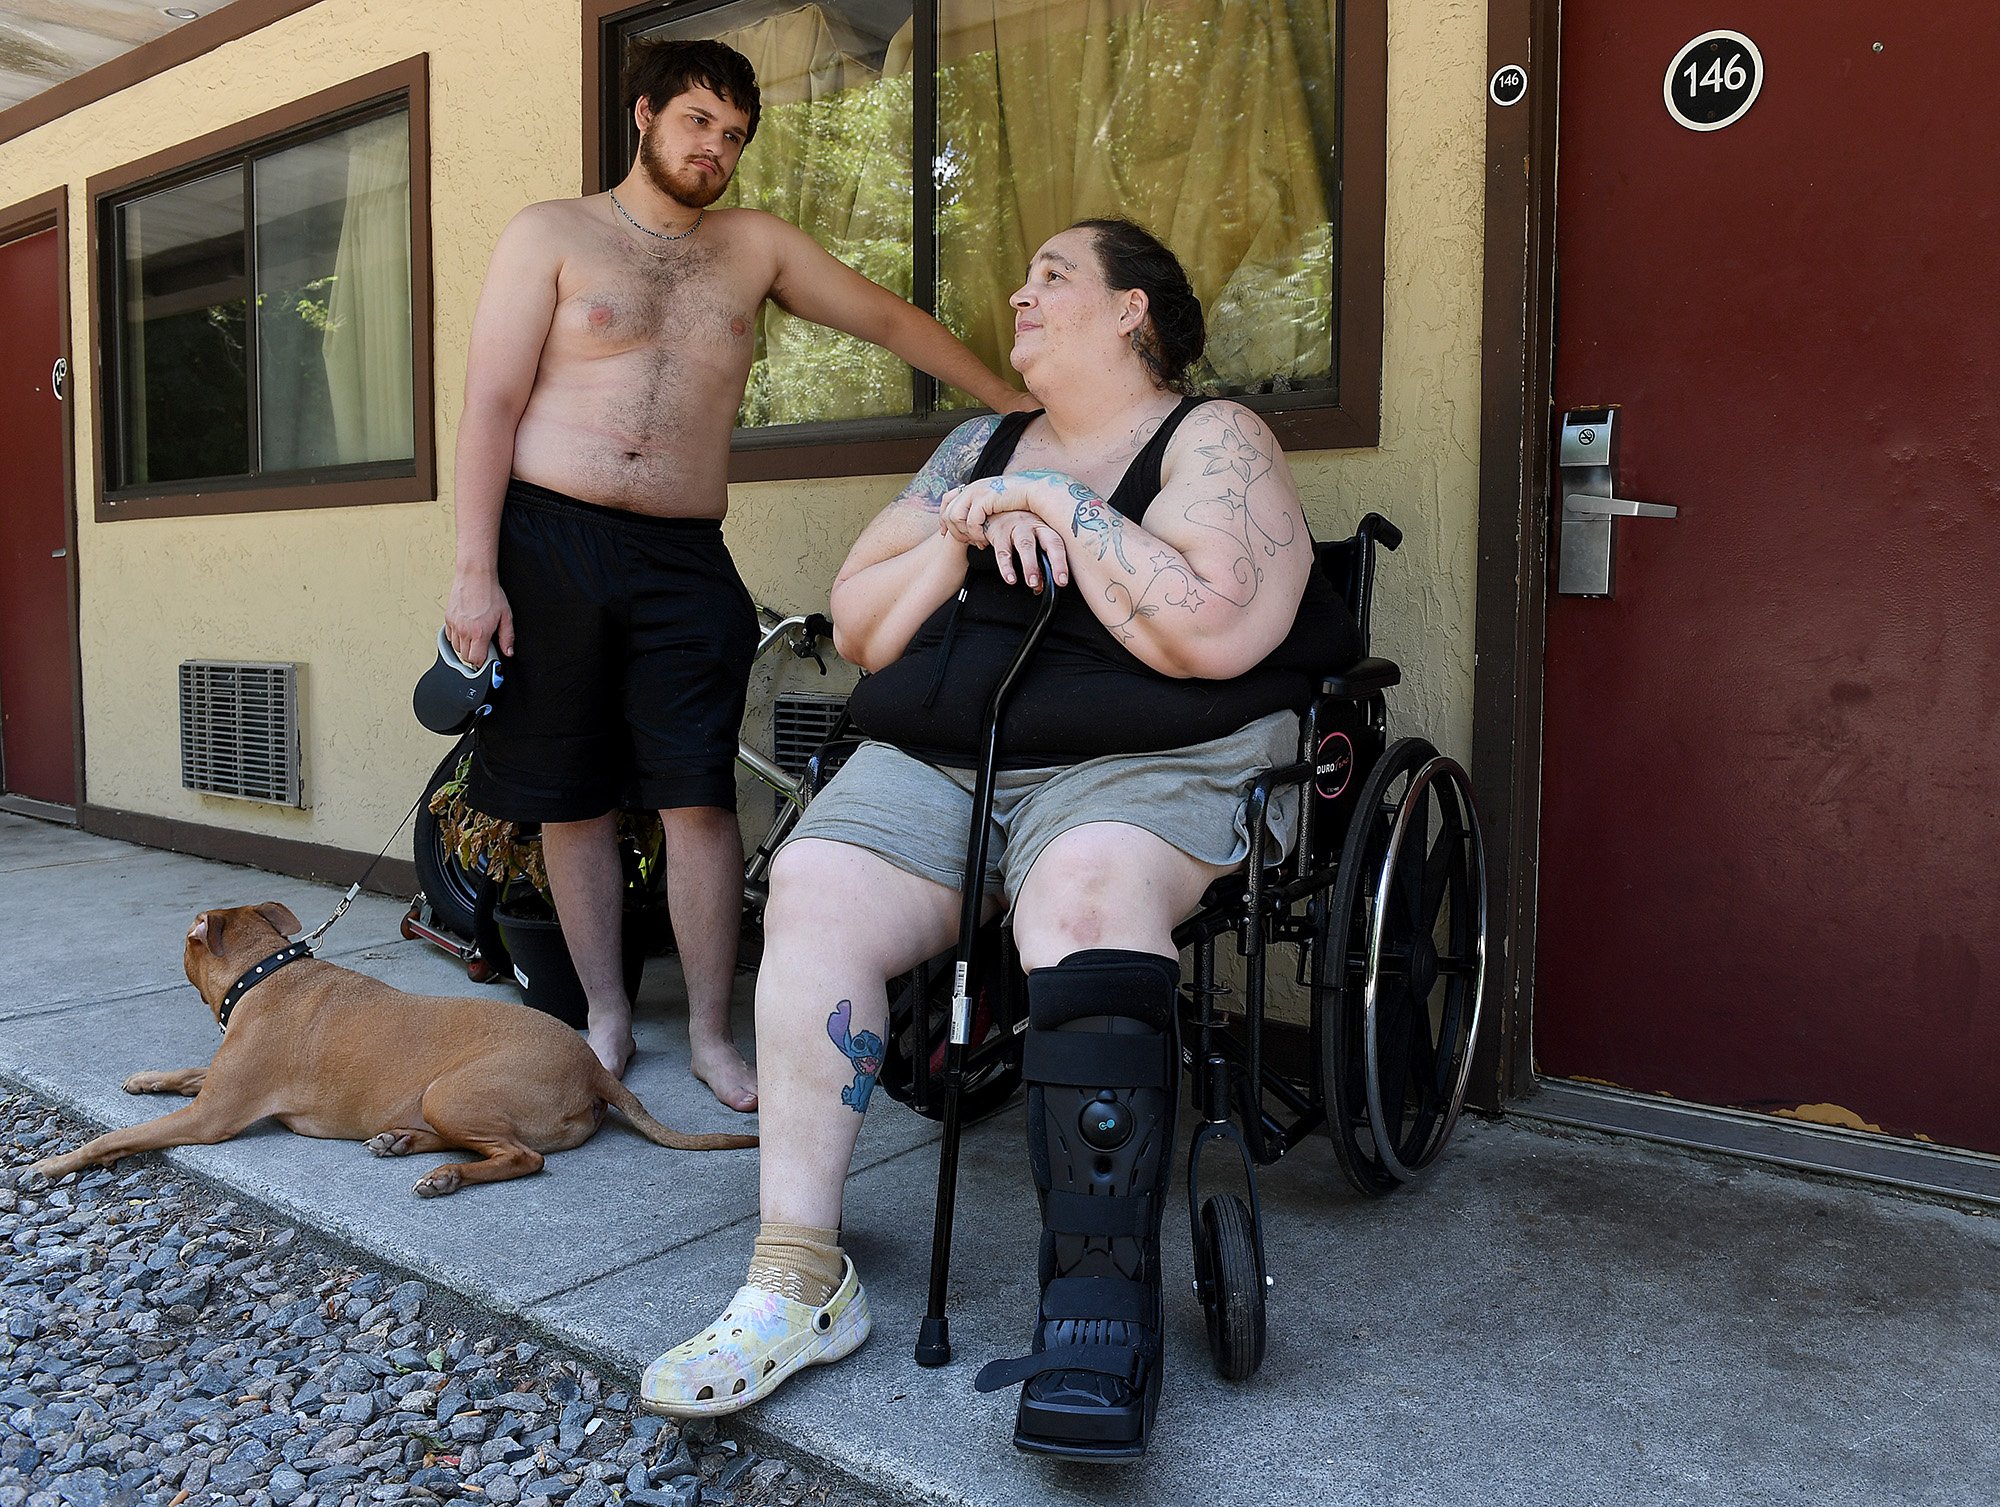  Sabrina Babey talks with her son Mike Roy, 18, and their dog Harmony outside their room at the Red Roof Inn in New London on Tuesday, August 9, 2022. The two have lived with her fiancé William Waddicor, two dogs and a cat for over two years and they